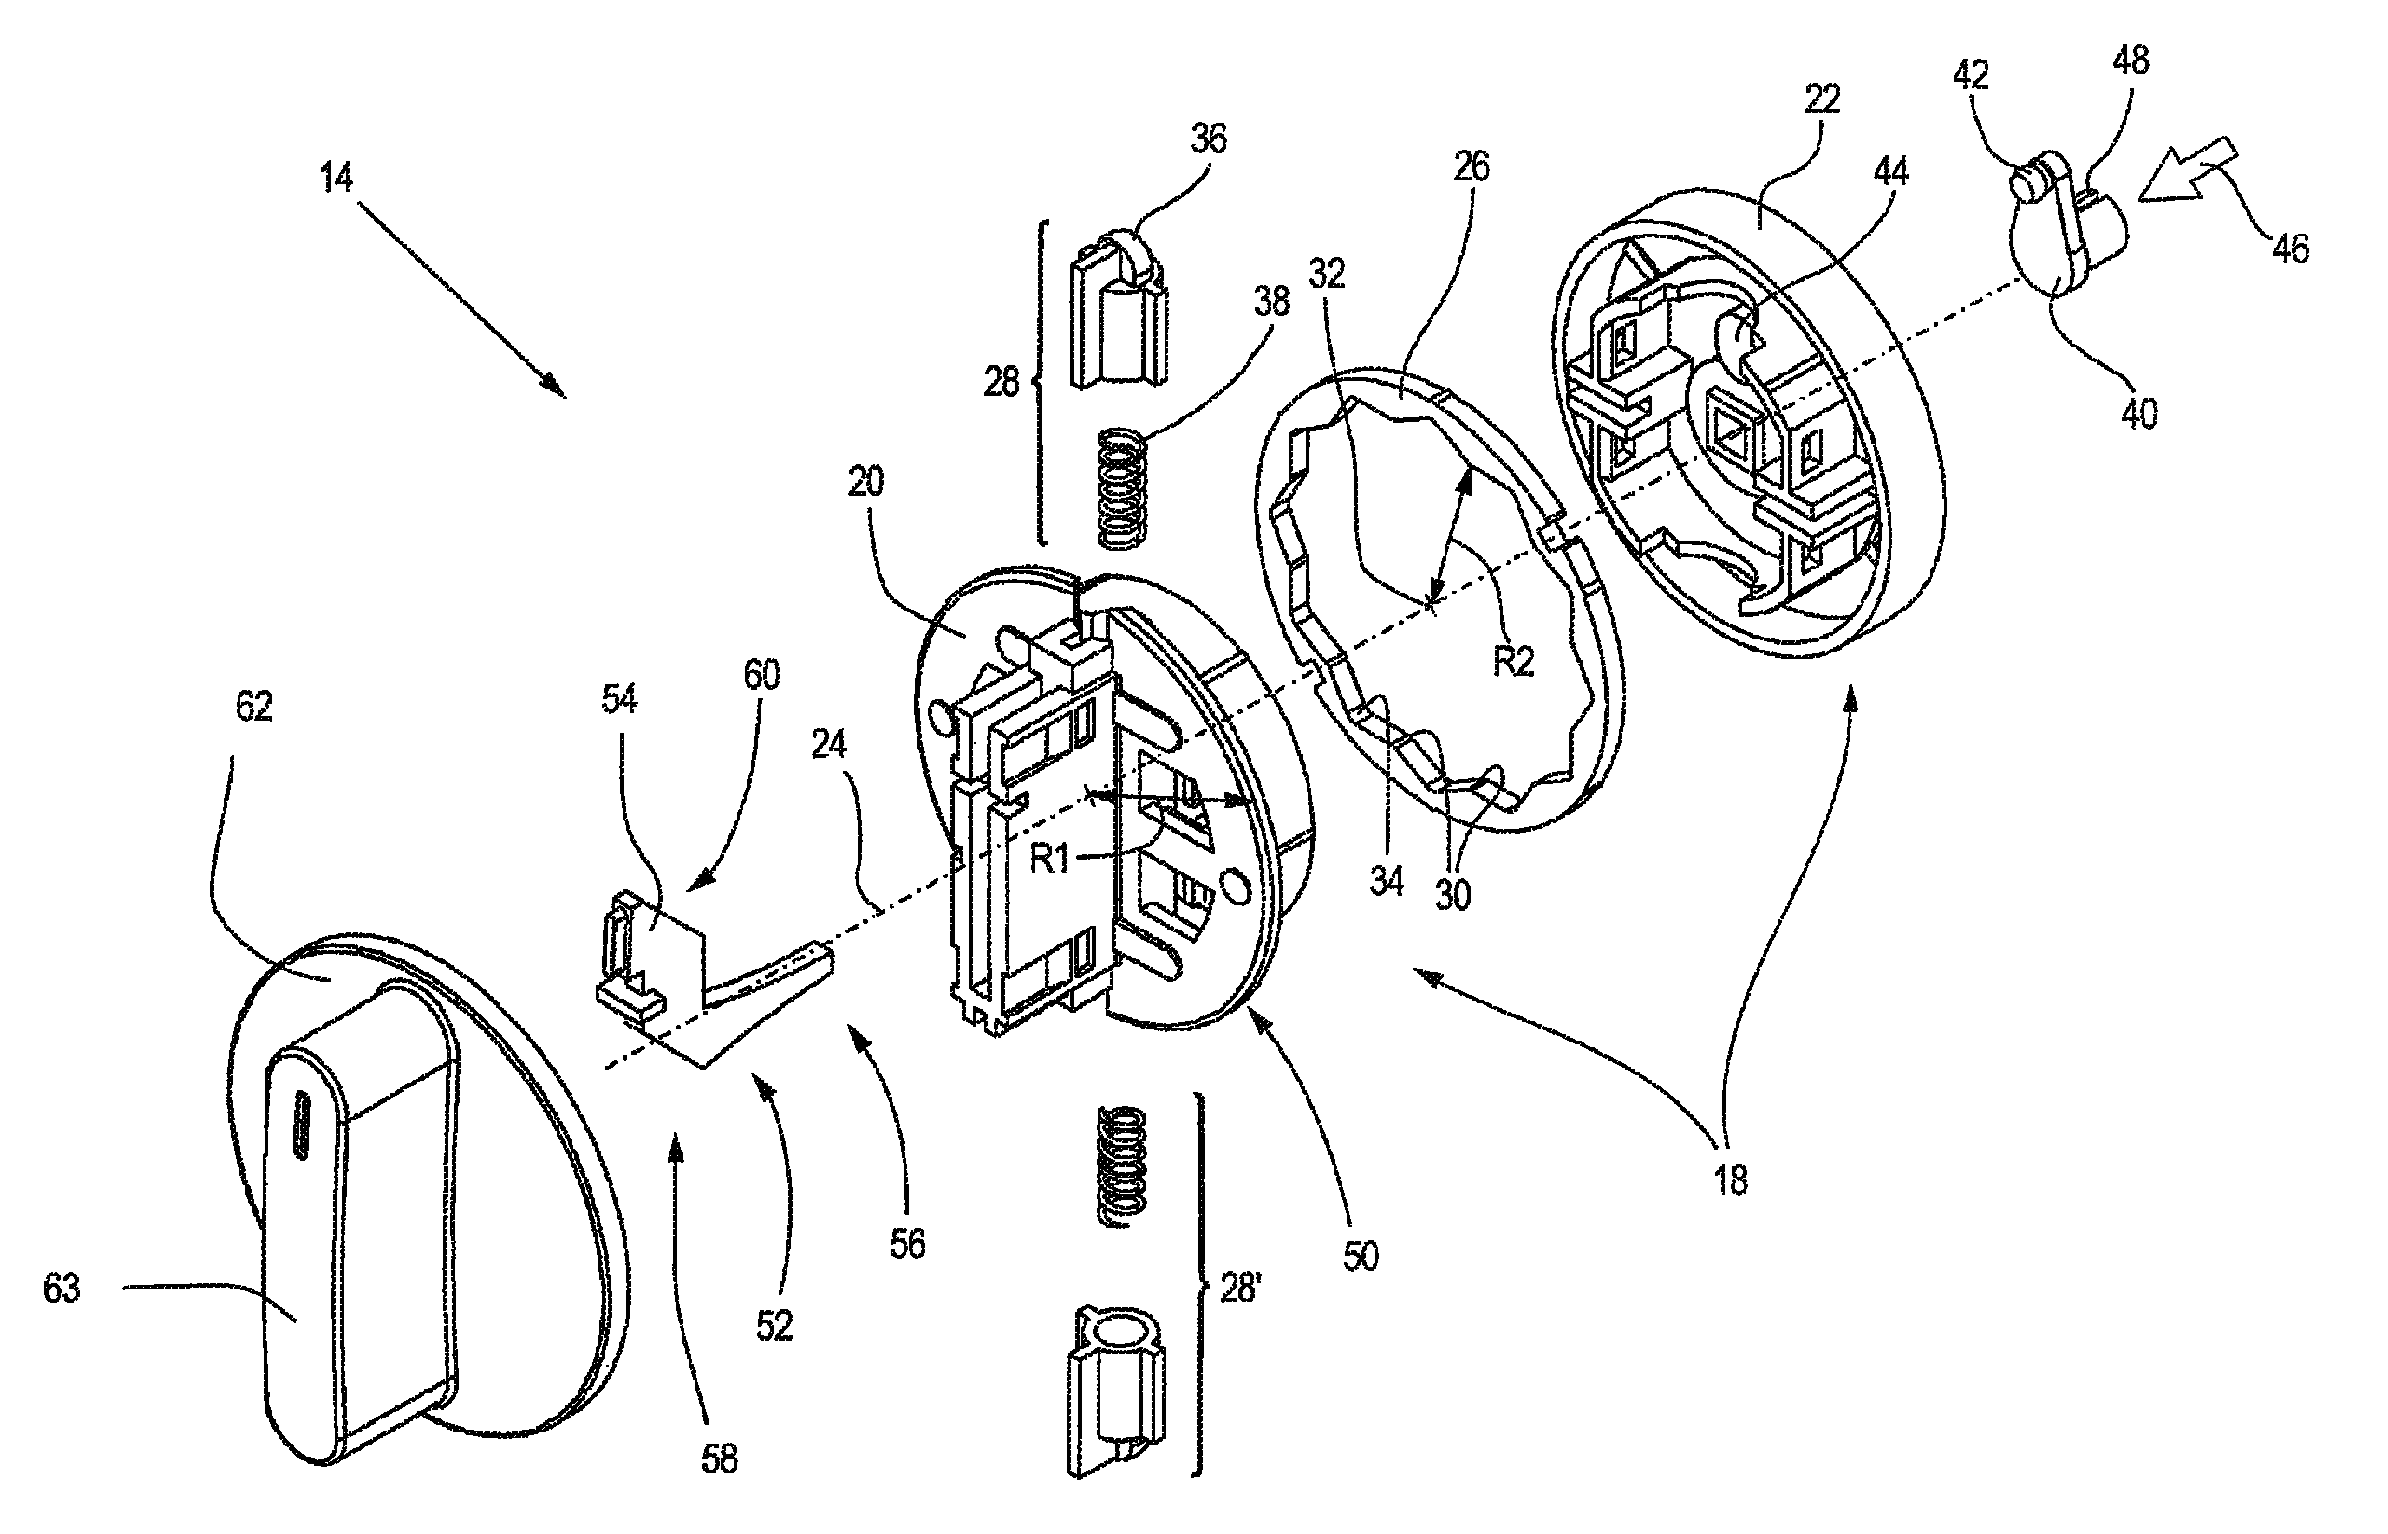 Panel for a domestic appliance having a rotary switch, and domestic appliance